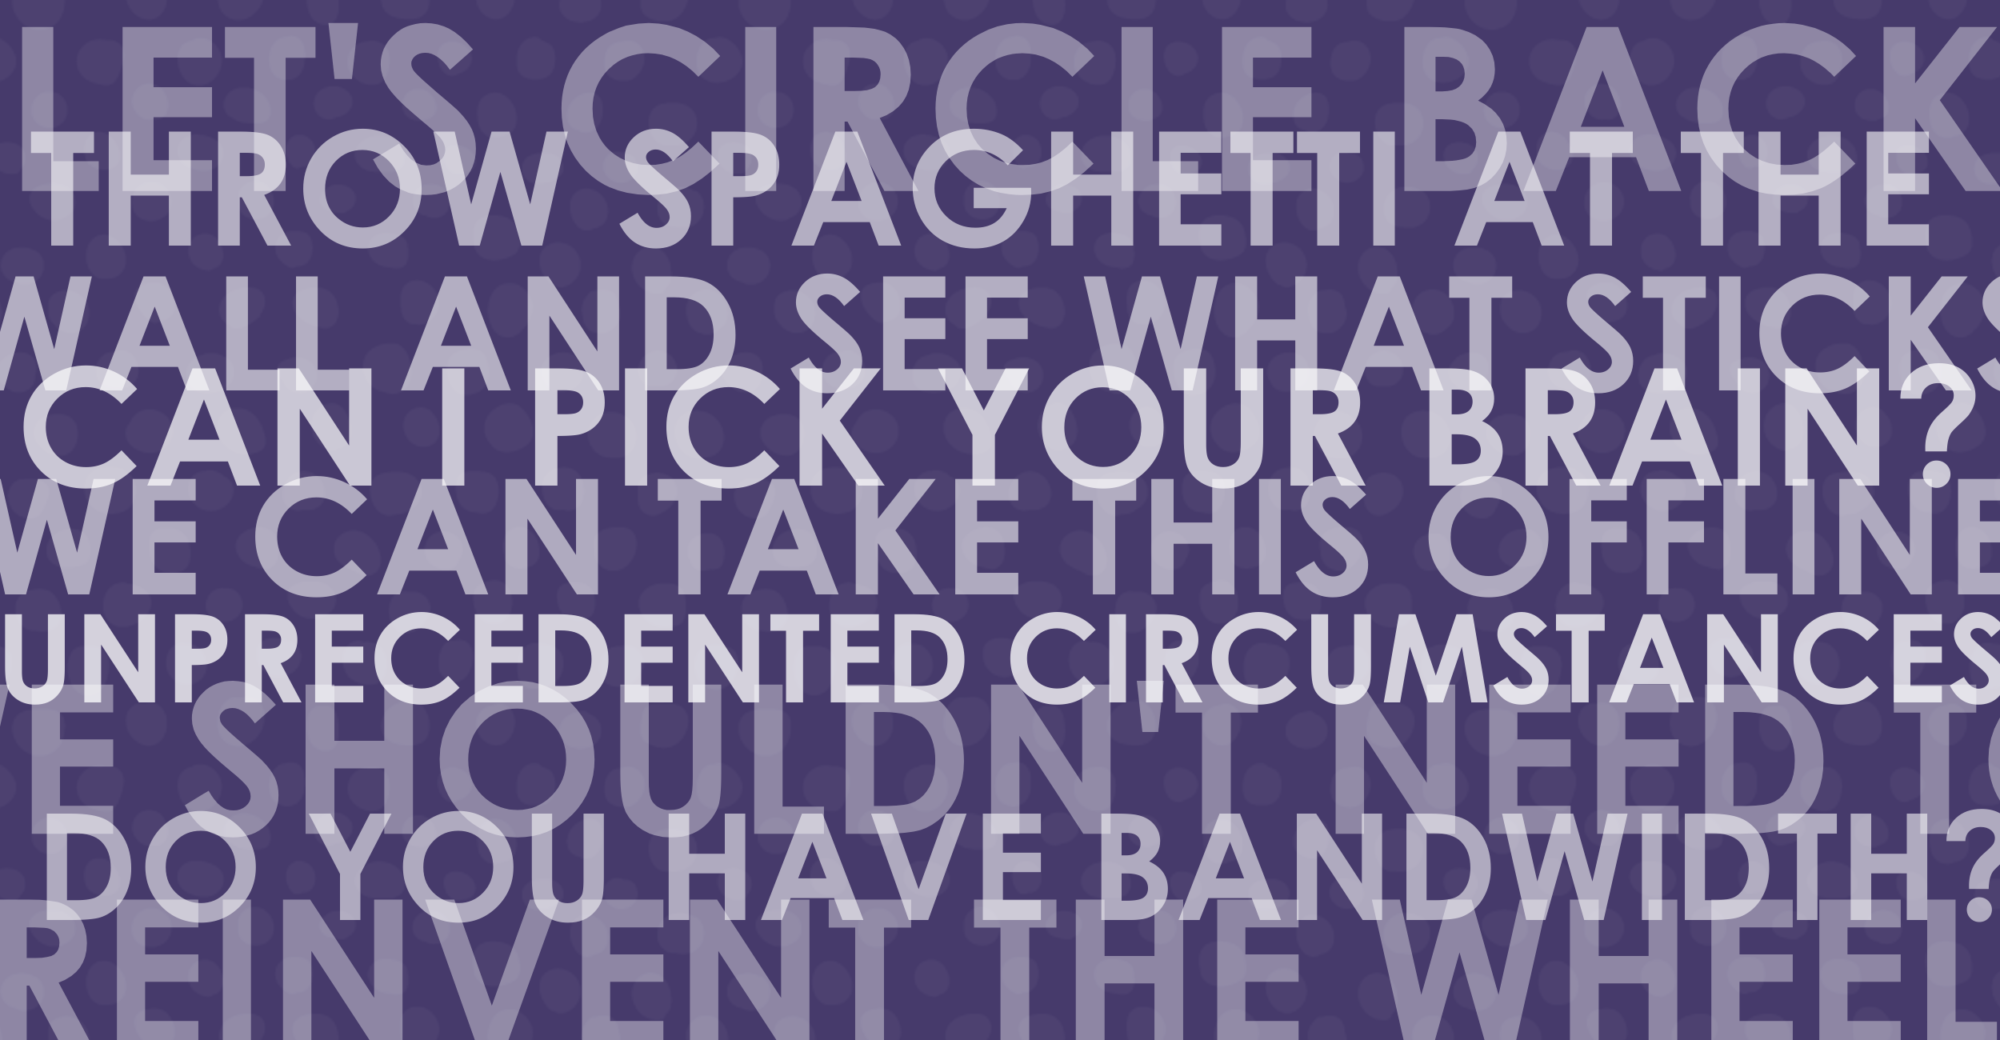 Several office jargon phrases overlap on a purple background. They contain, "circle back," "pick your battles," and more.